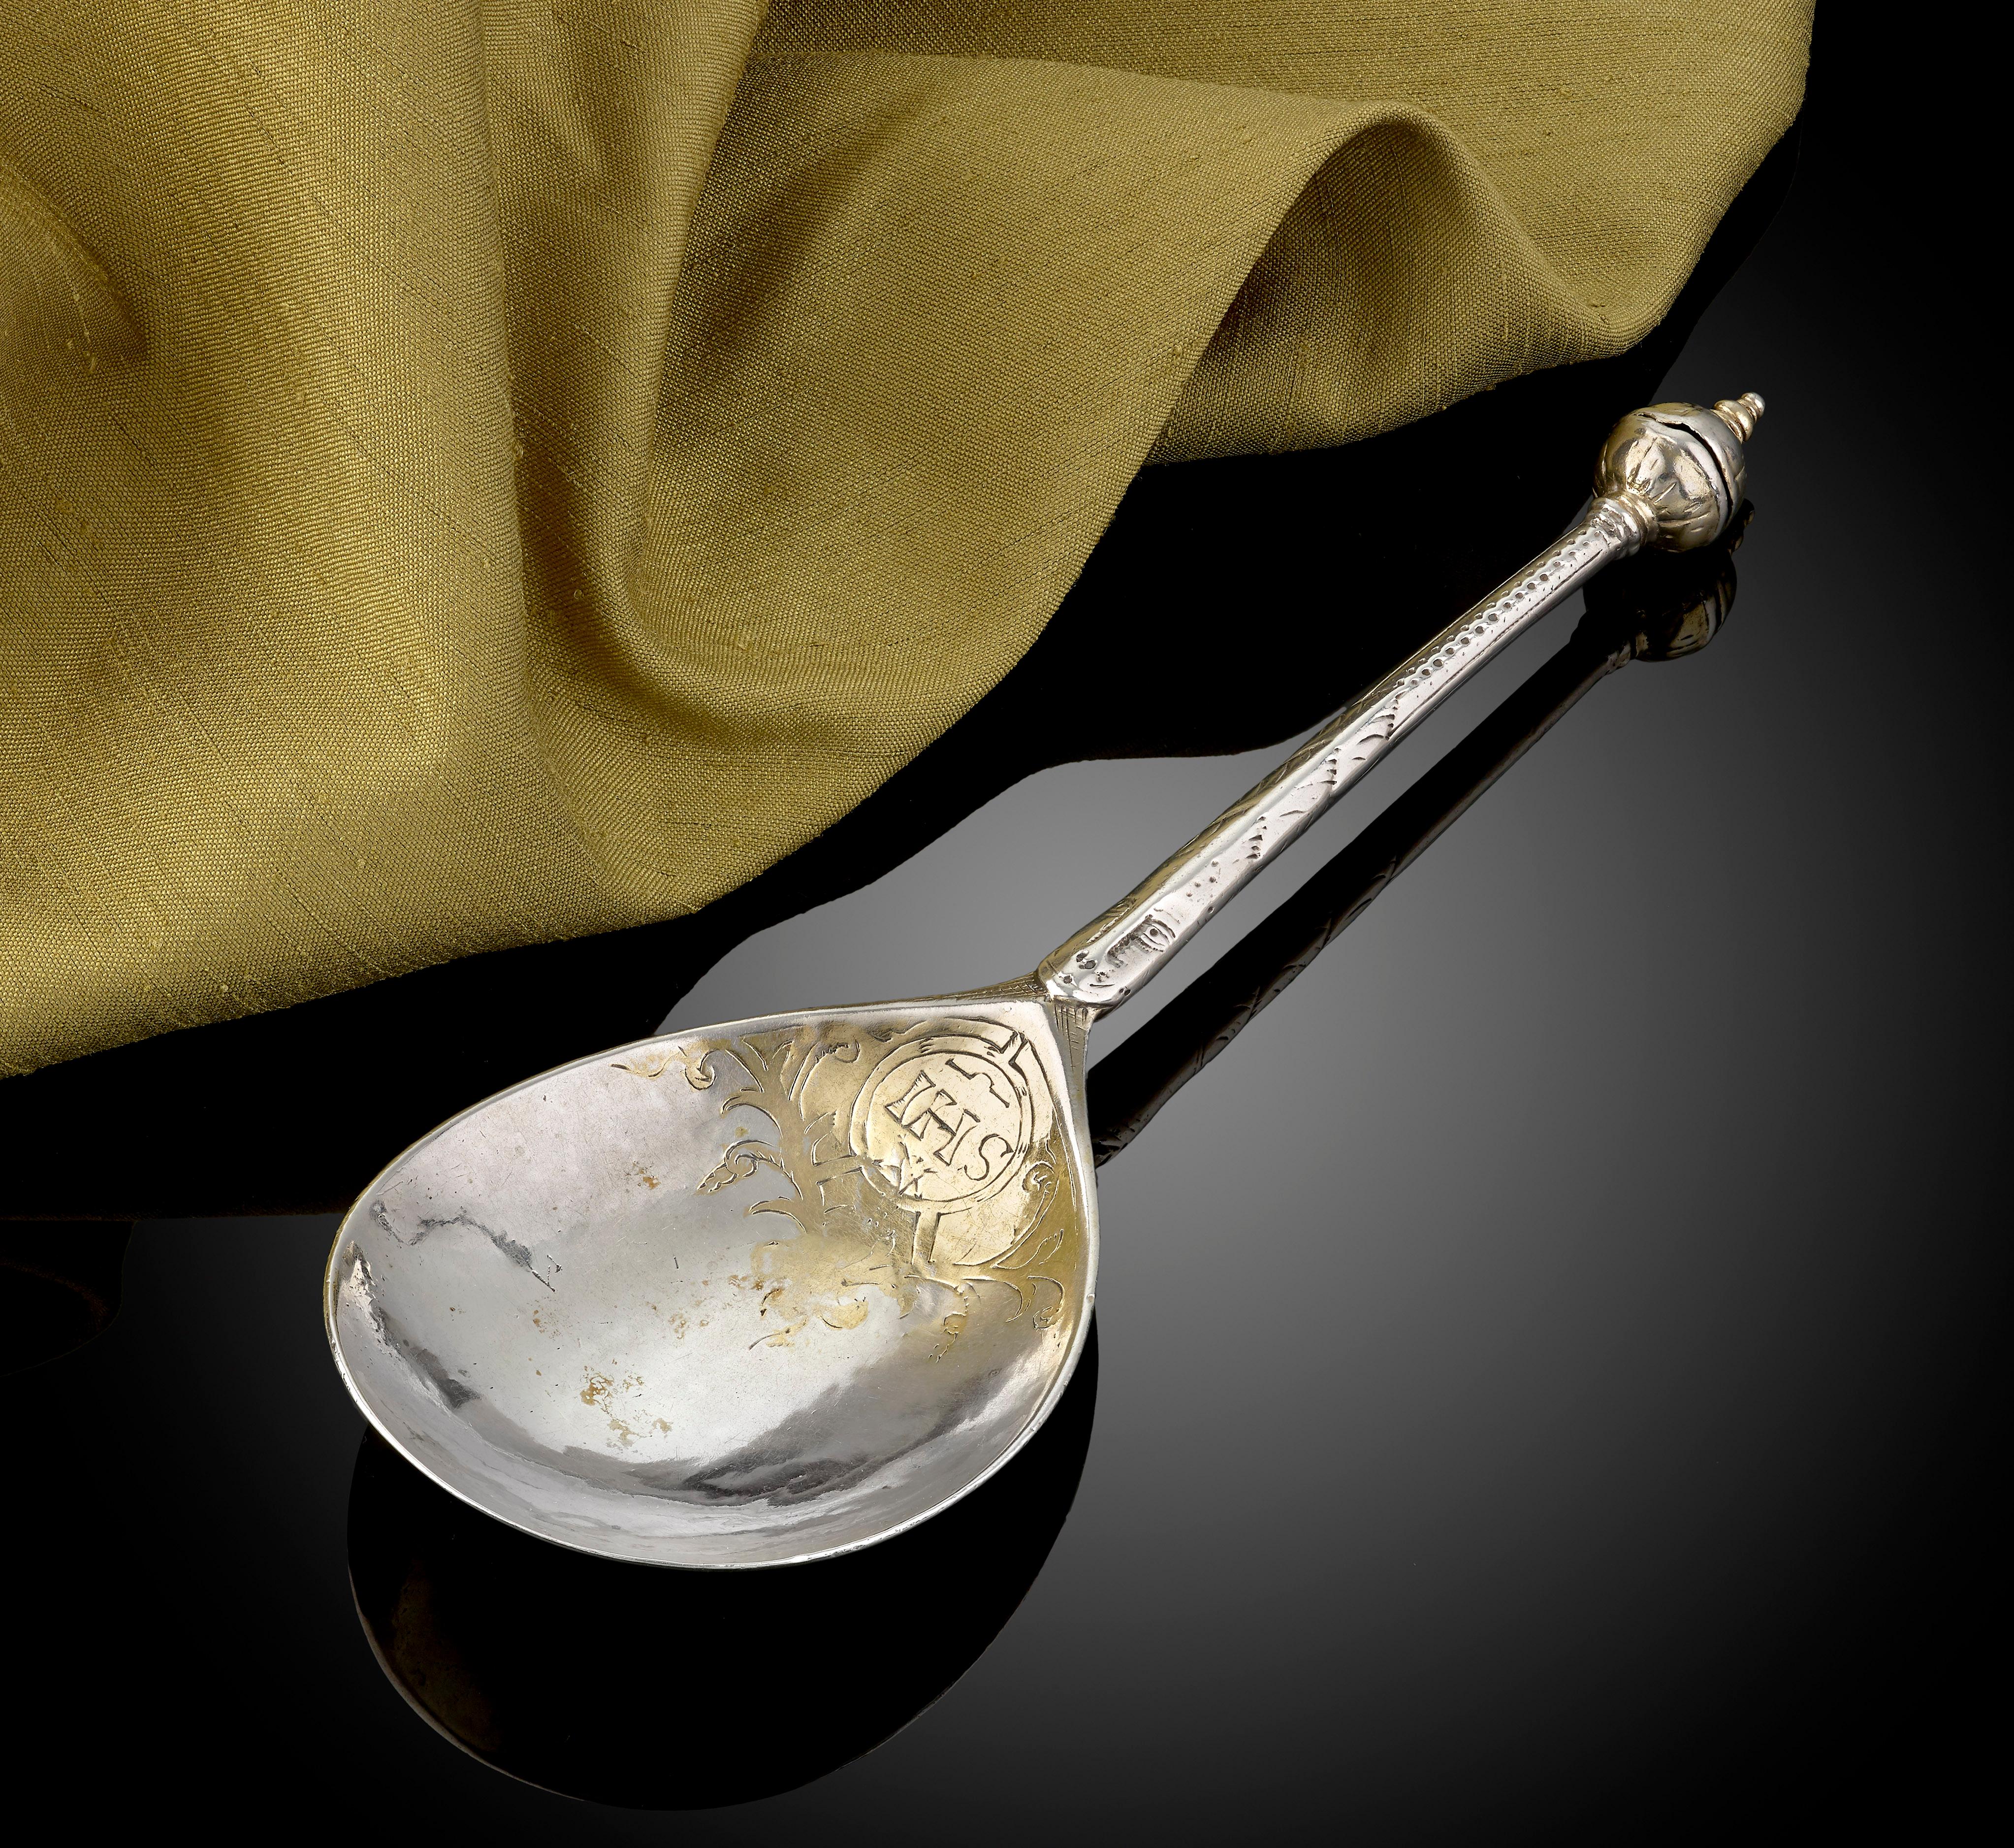 A rare early Norwegian silver and parcel gilt spoon, circa 1590; with a' ball knop', and the stem decorated with a face; IHS monogram in the bowl. For a spoon of similar style see '100 Norske Solverskjeer' by Hans Johan Storesund -Spoon No.2. The